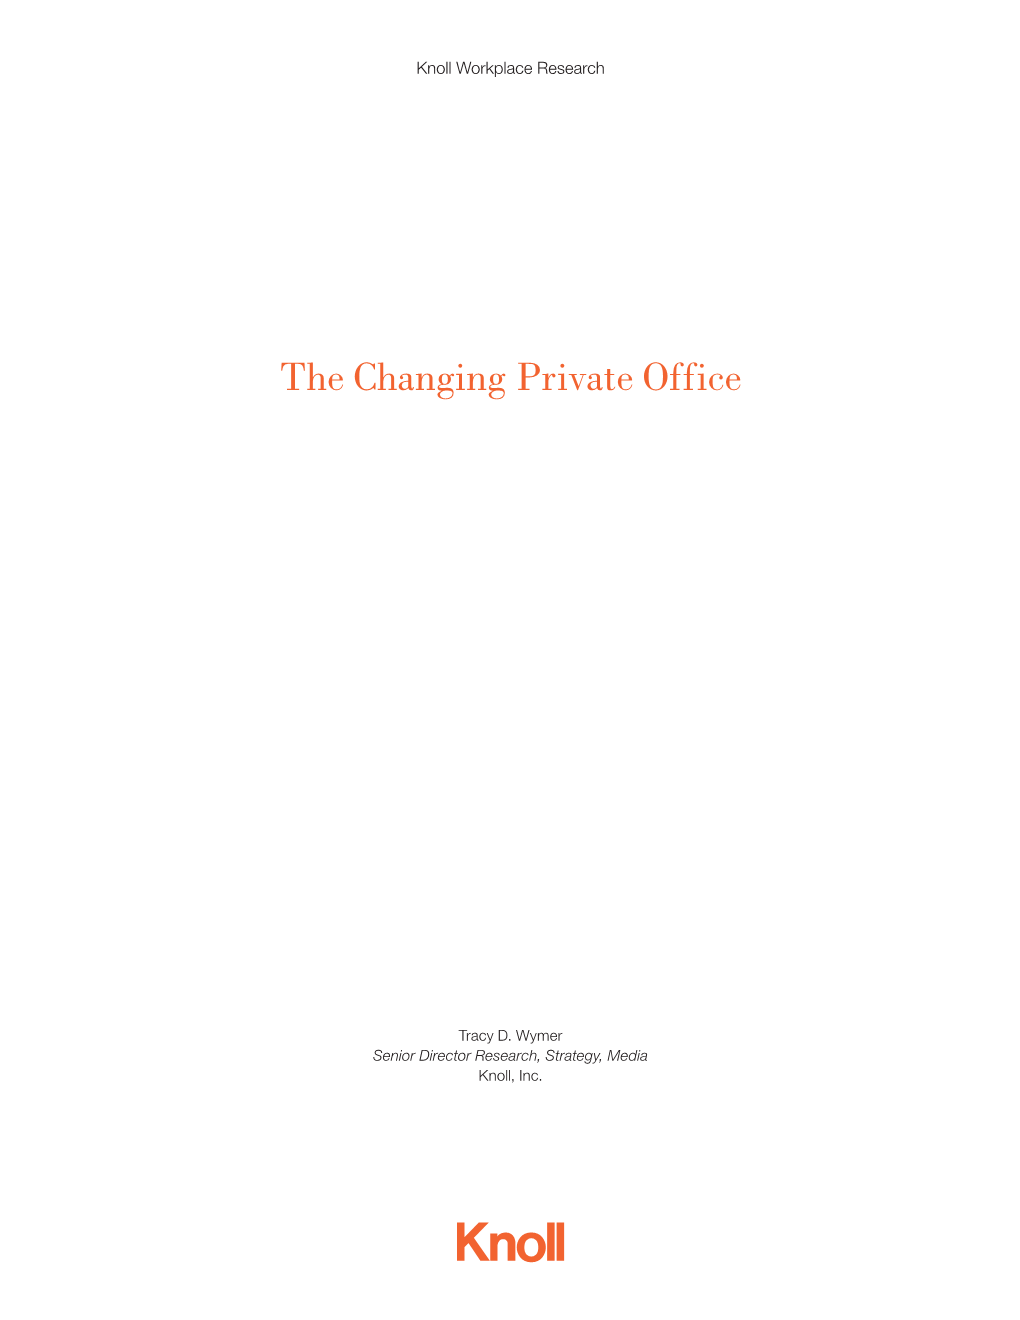 The Changing Private Office